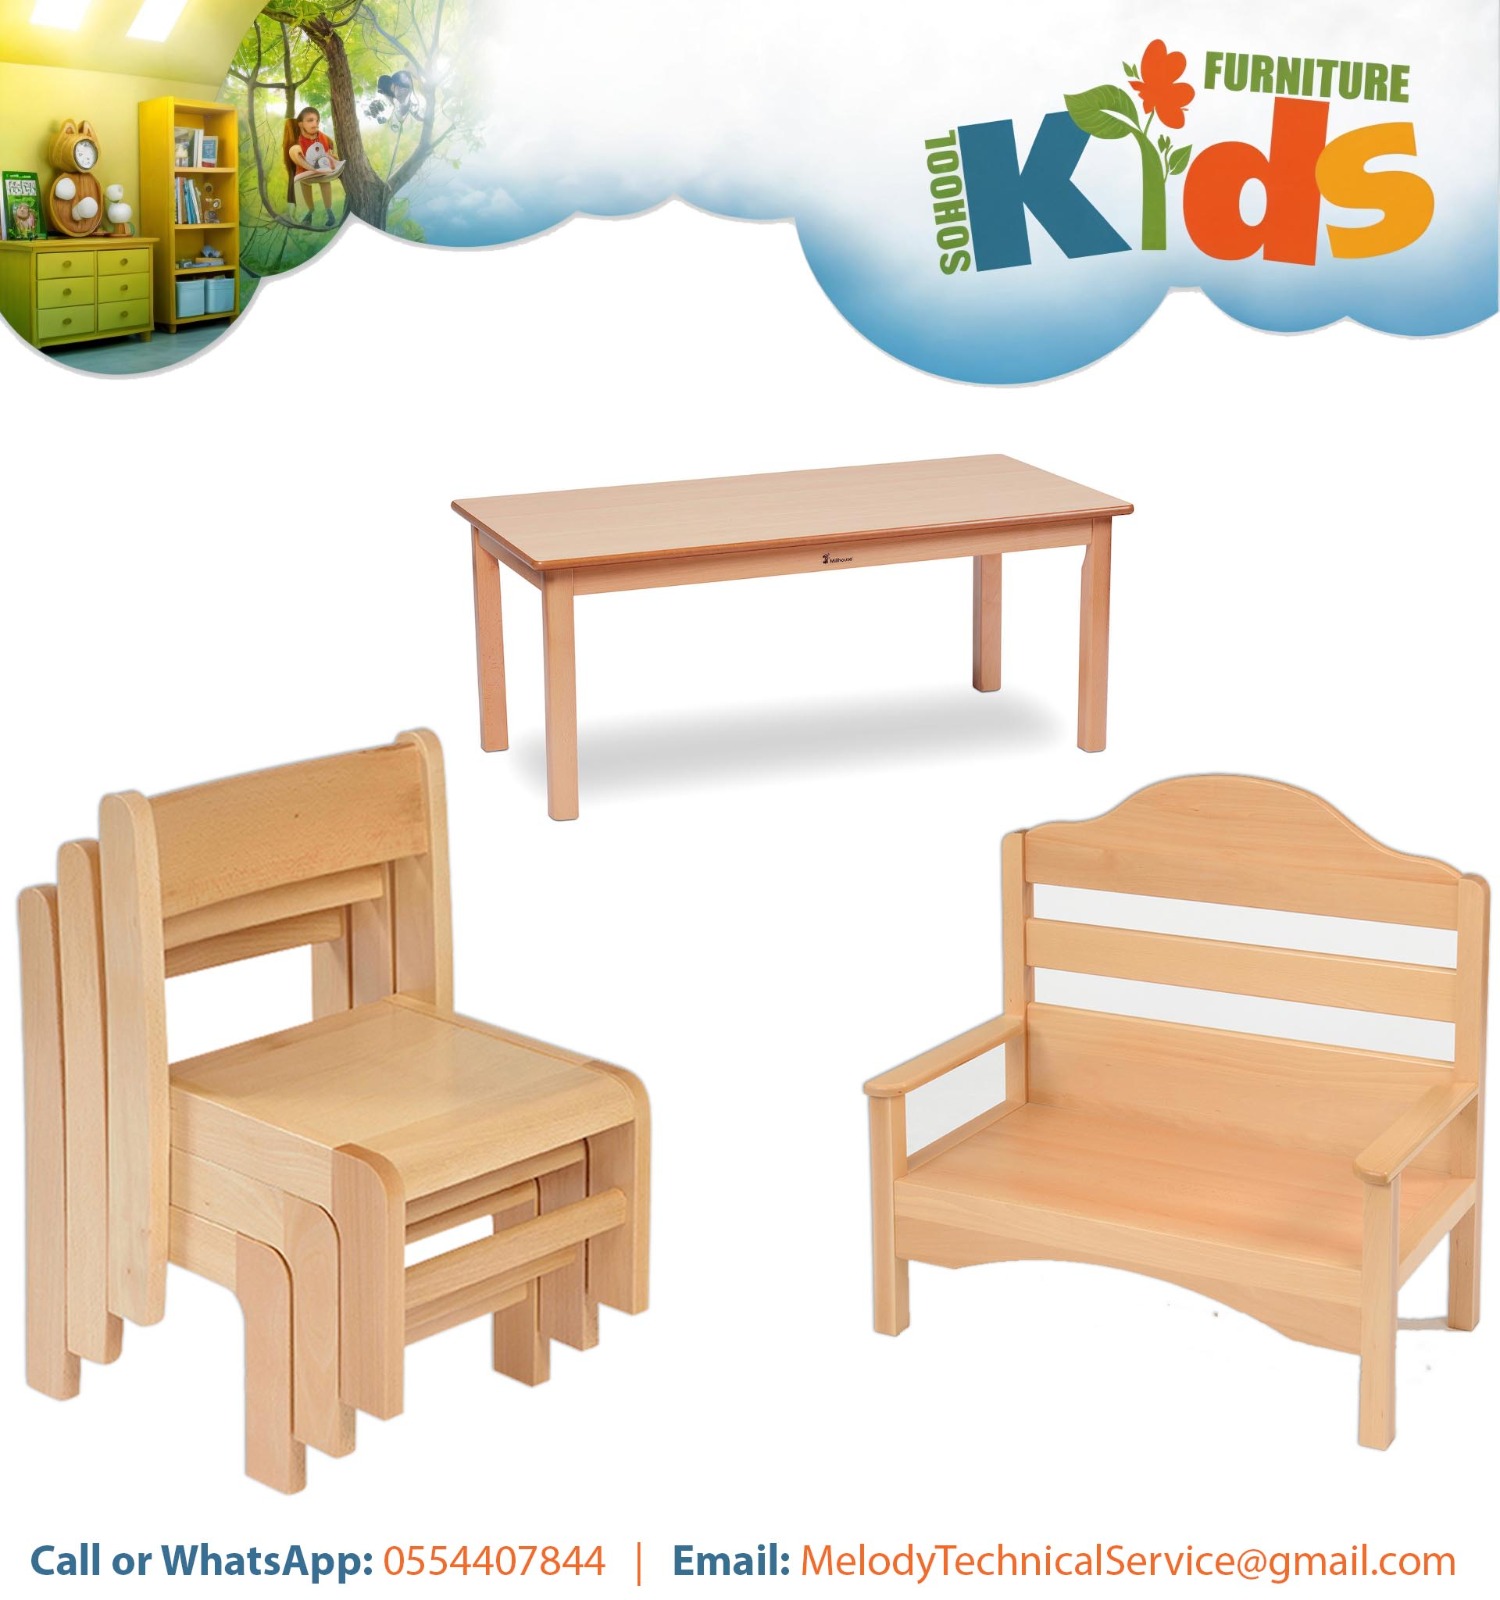 School Furniture | Kids Furniture | Tables And Chairs in Dubai